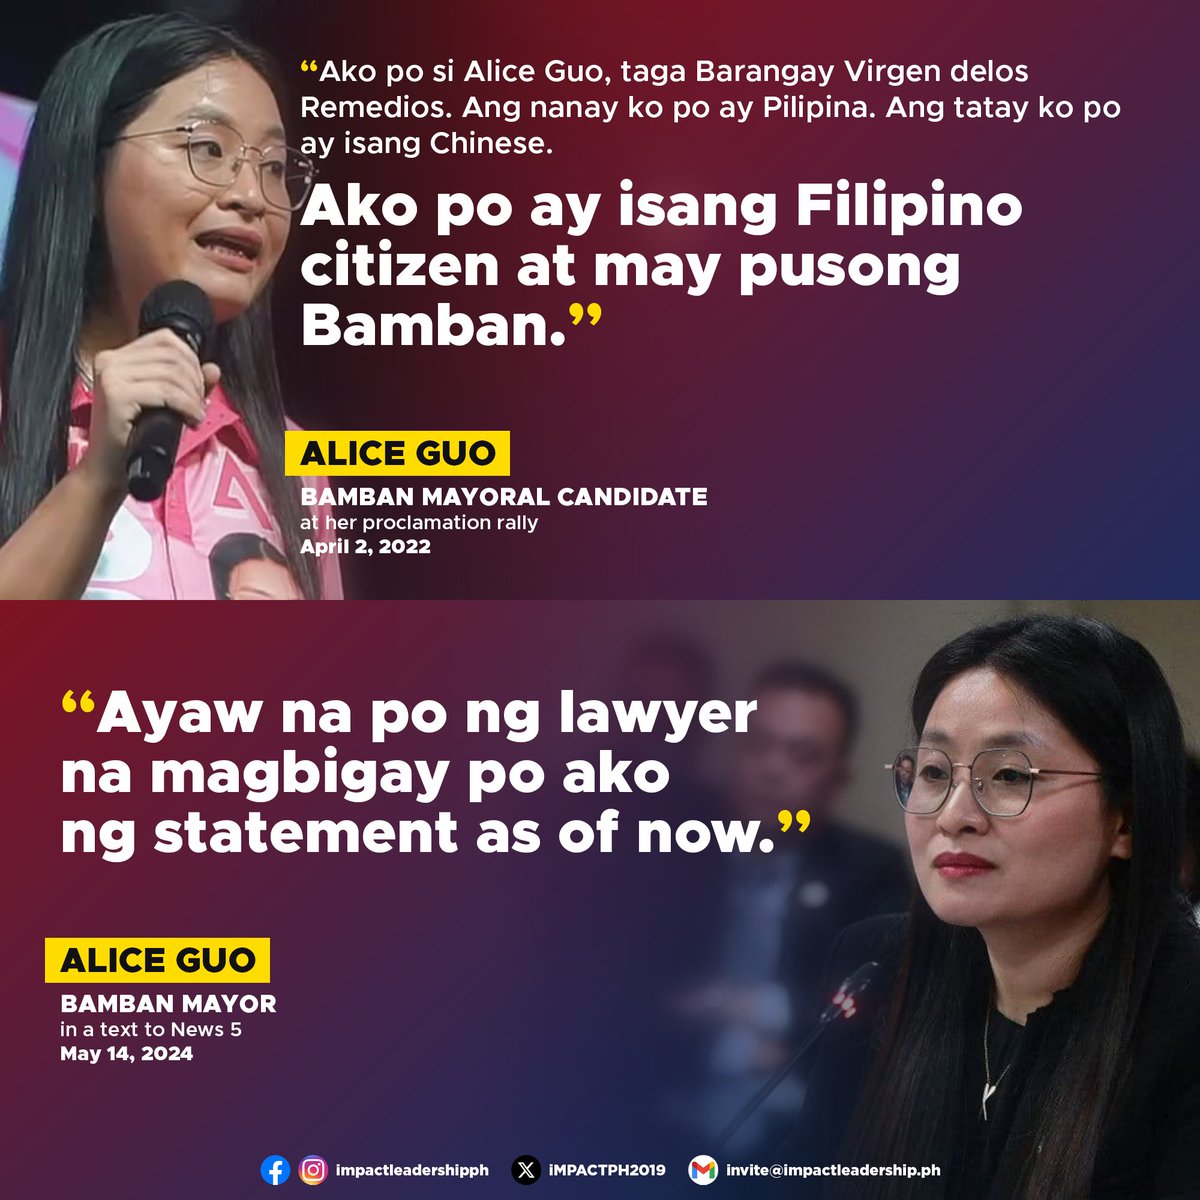 'AYAW NA PO NG LAWYER' Mayor Alice Guo of Bamban, Tarlac, declined to issue a statement to News 5, which aired a report on Tuesday (May 14) about her background. As early as 2022, Guo mentioned that many people had been asking about her identity.